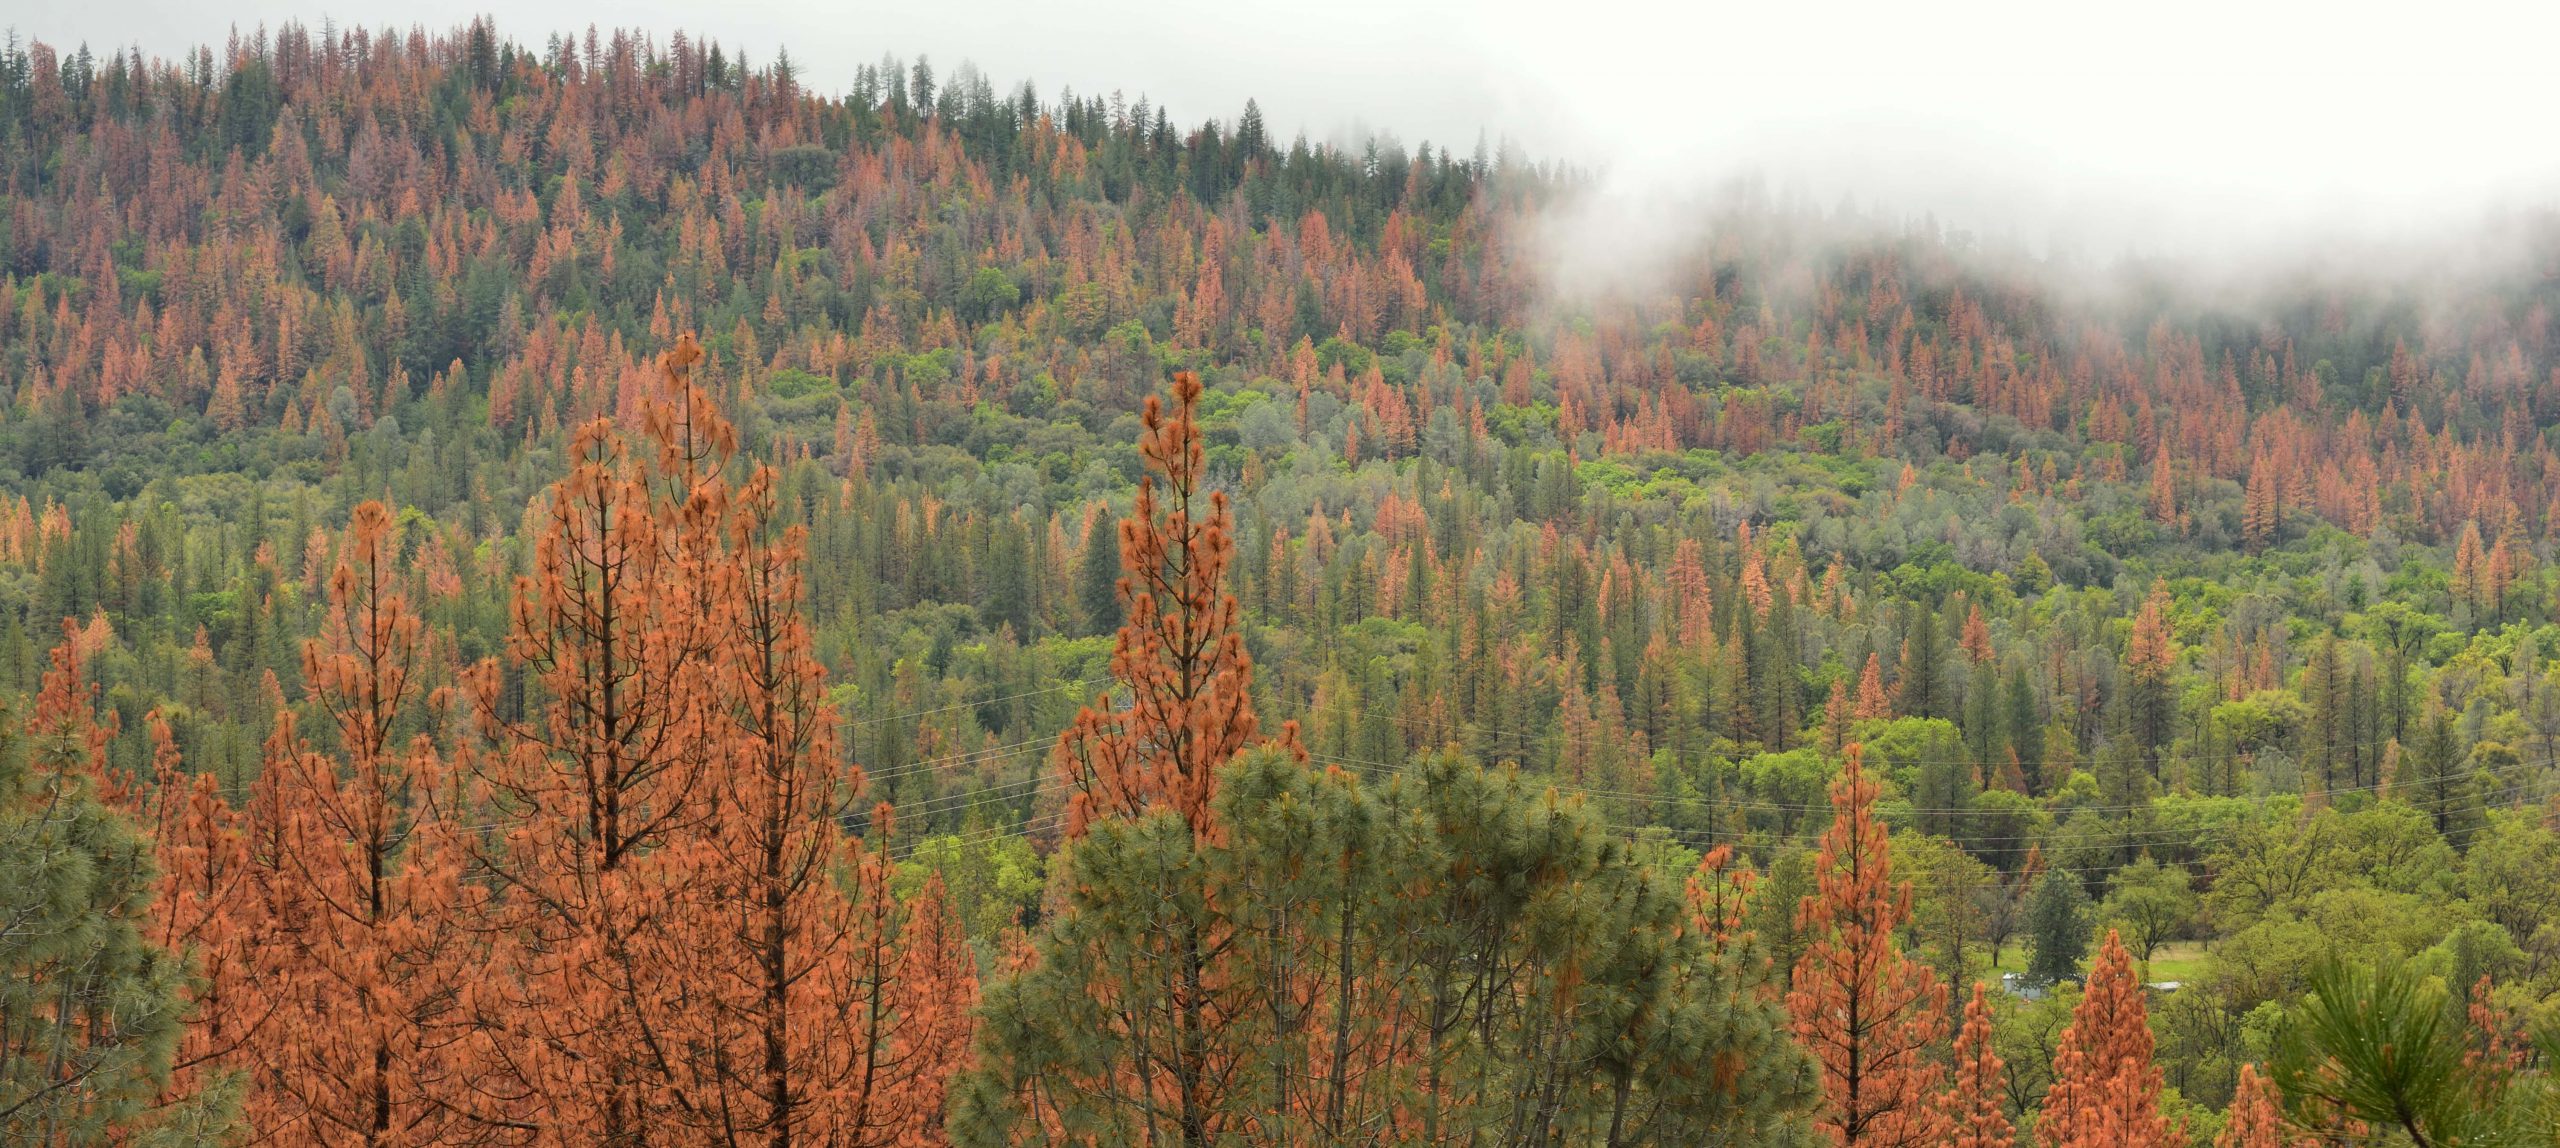 Pine trees dying from drought and pine beetle